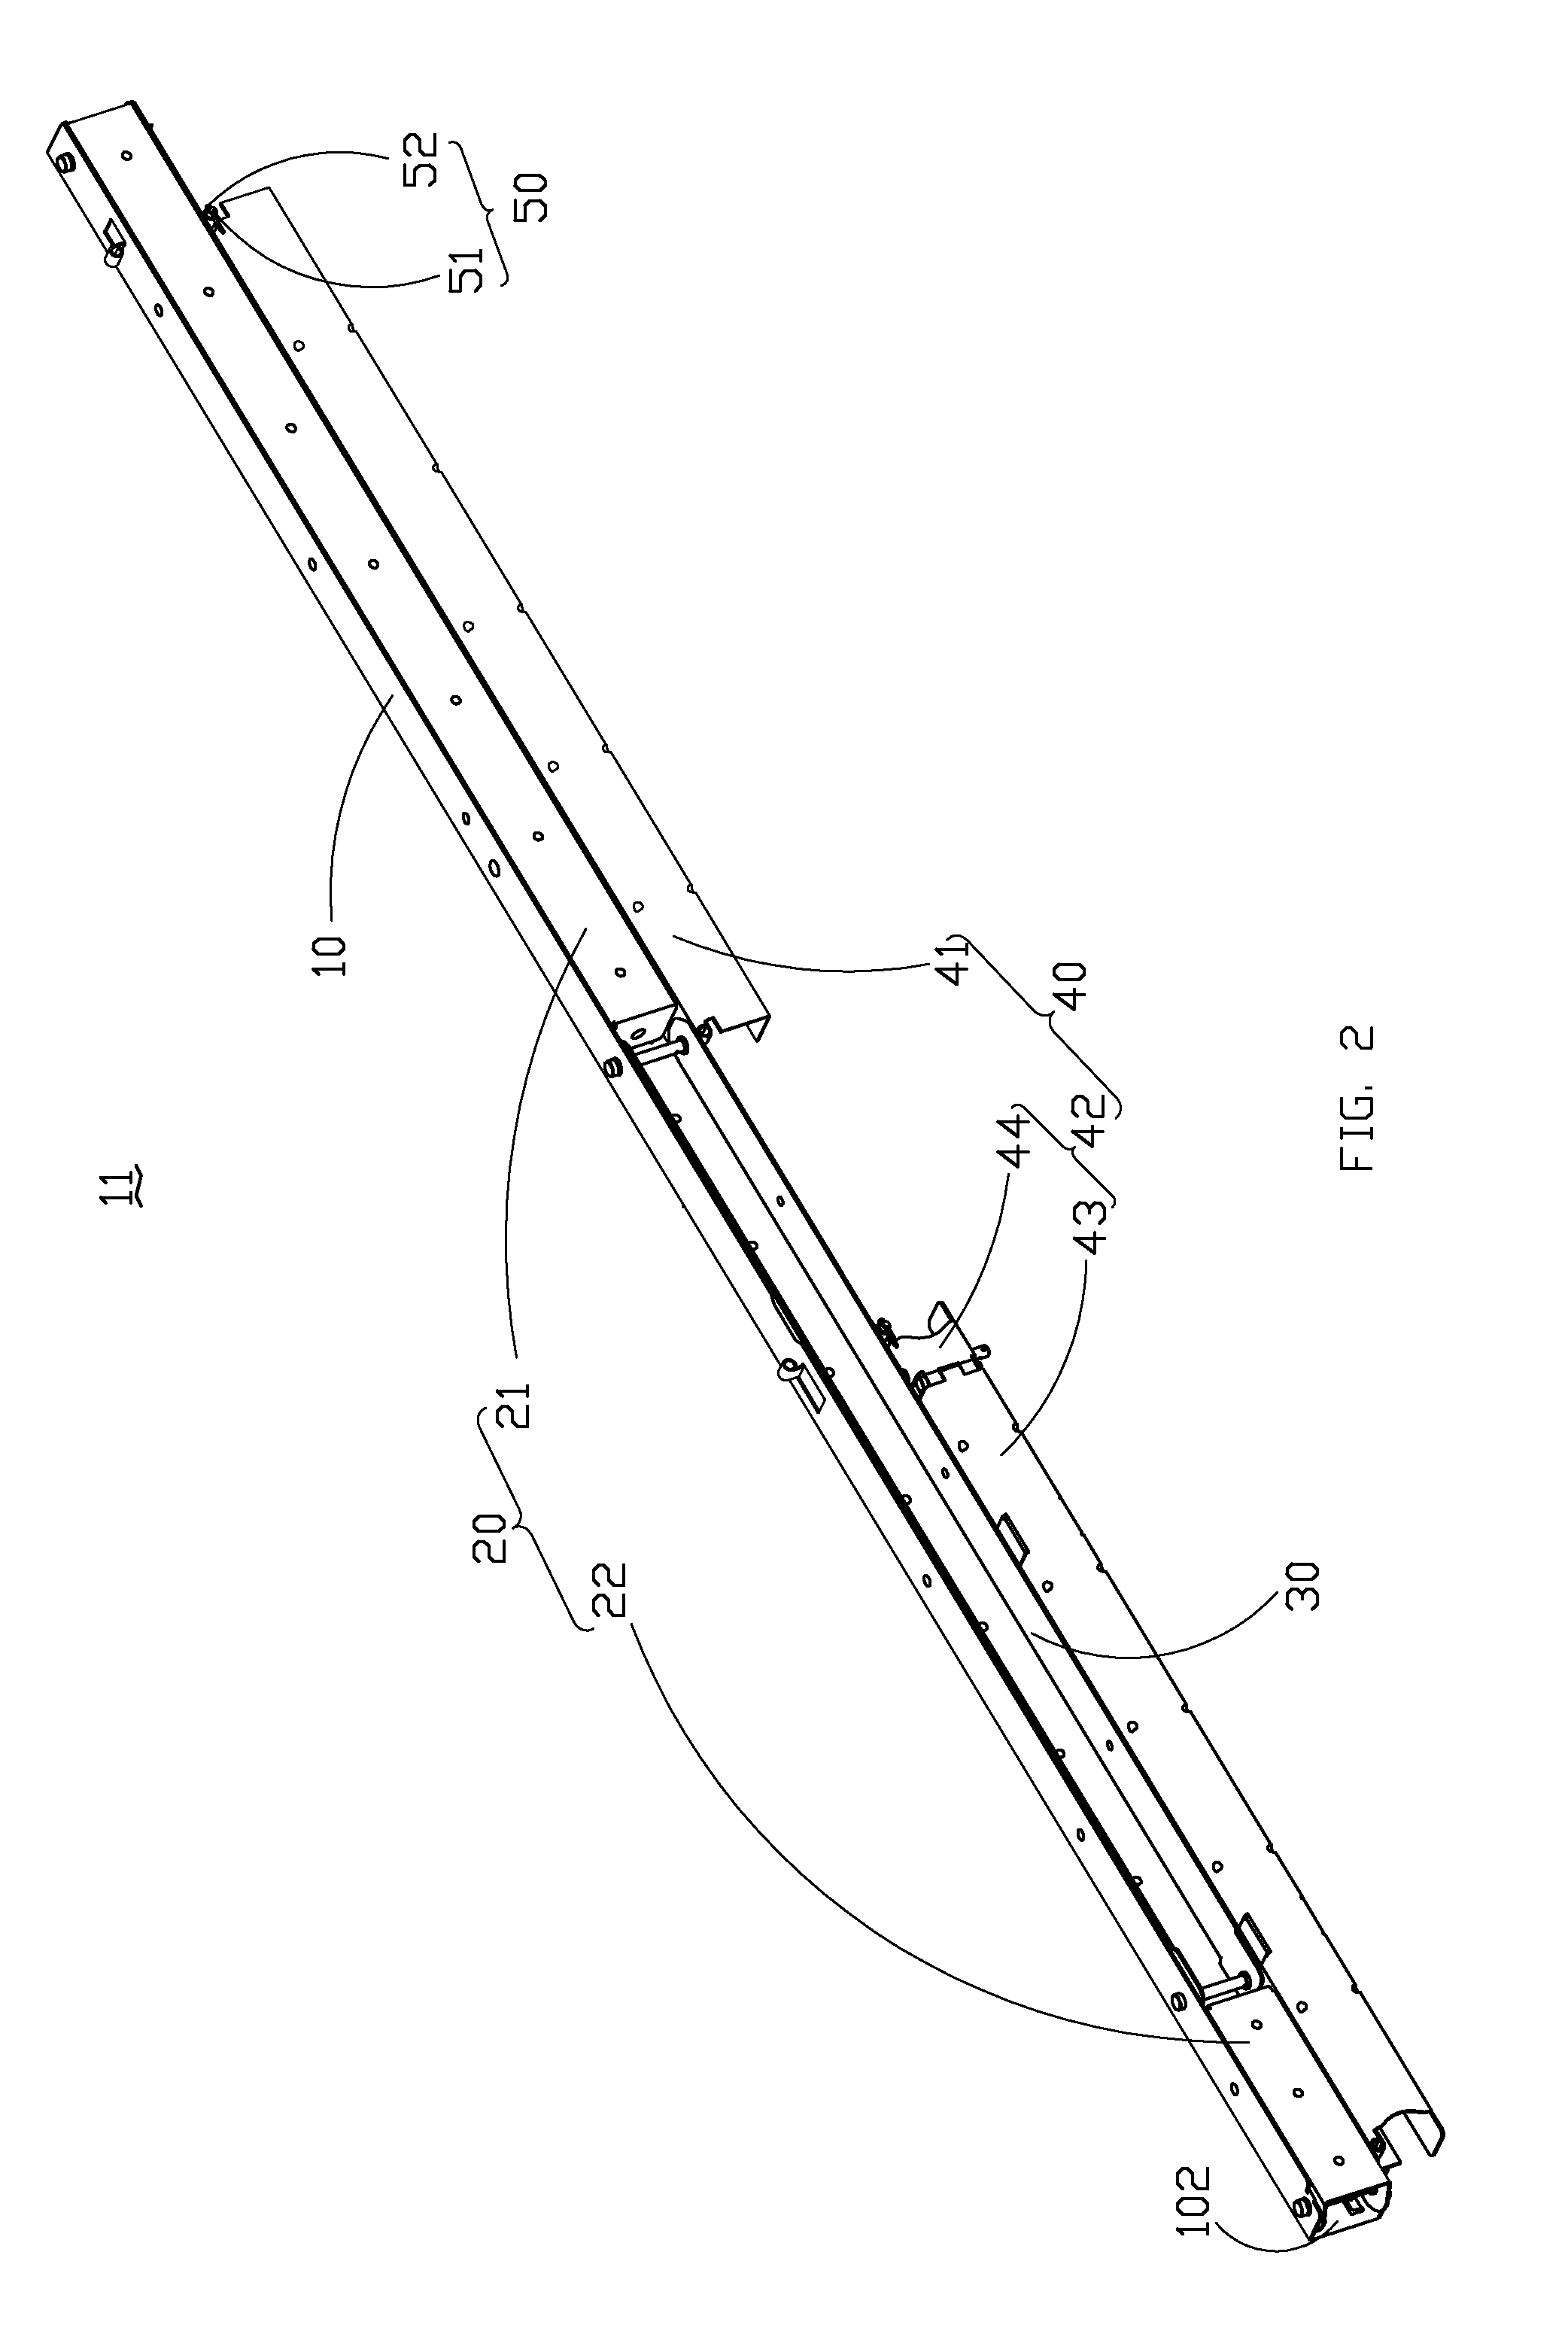 Support assembly for photovoltaic panels